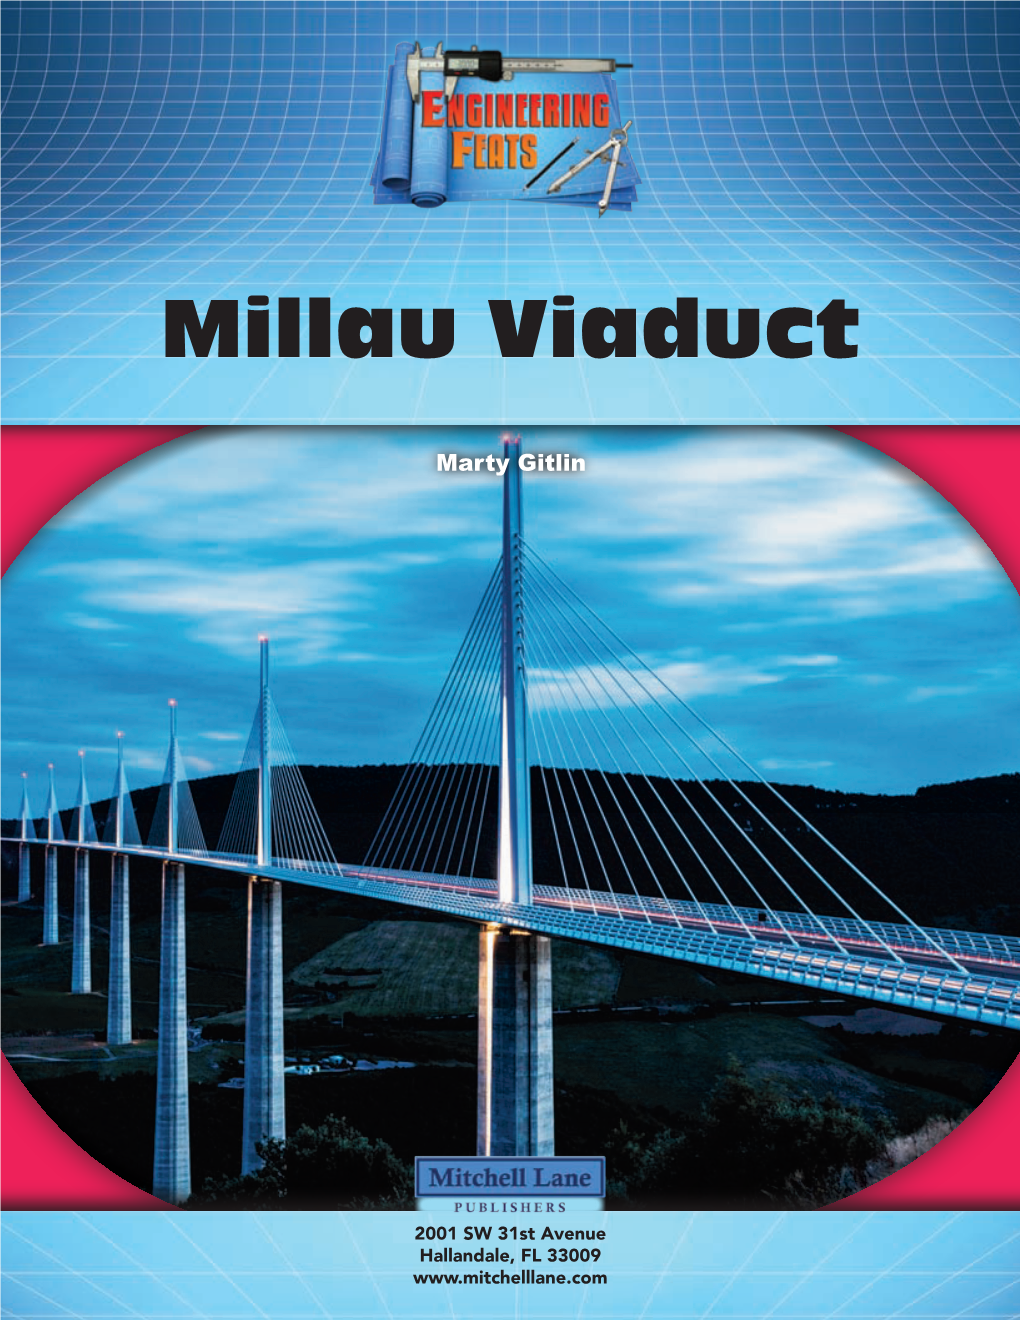 Millau Viaduct Book.Indd 1 12/18/17 2:52 PM Copyright © 2018 by Mitchell Lane Publishers